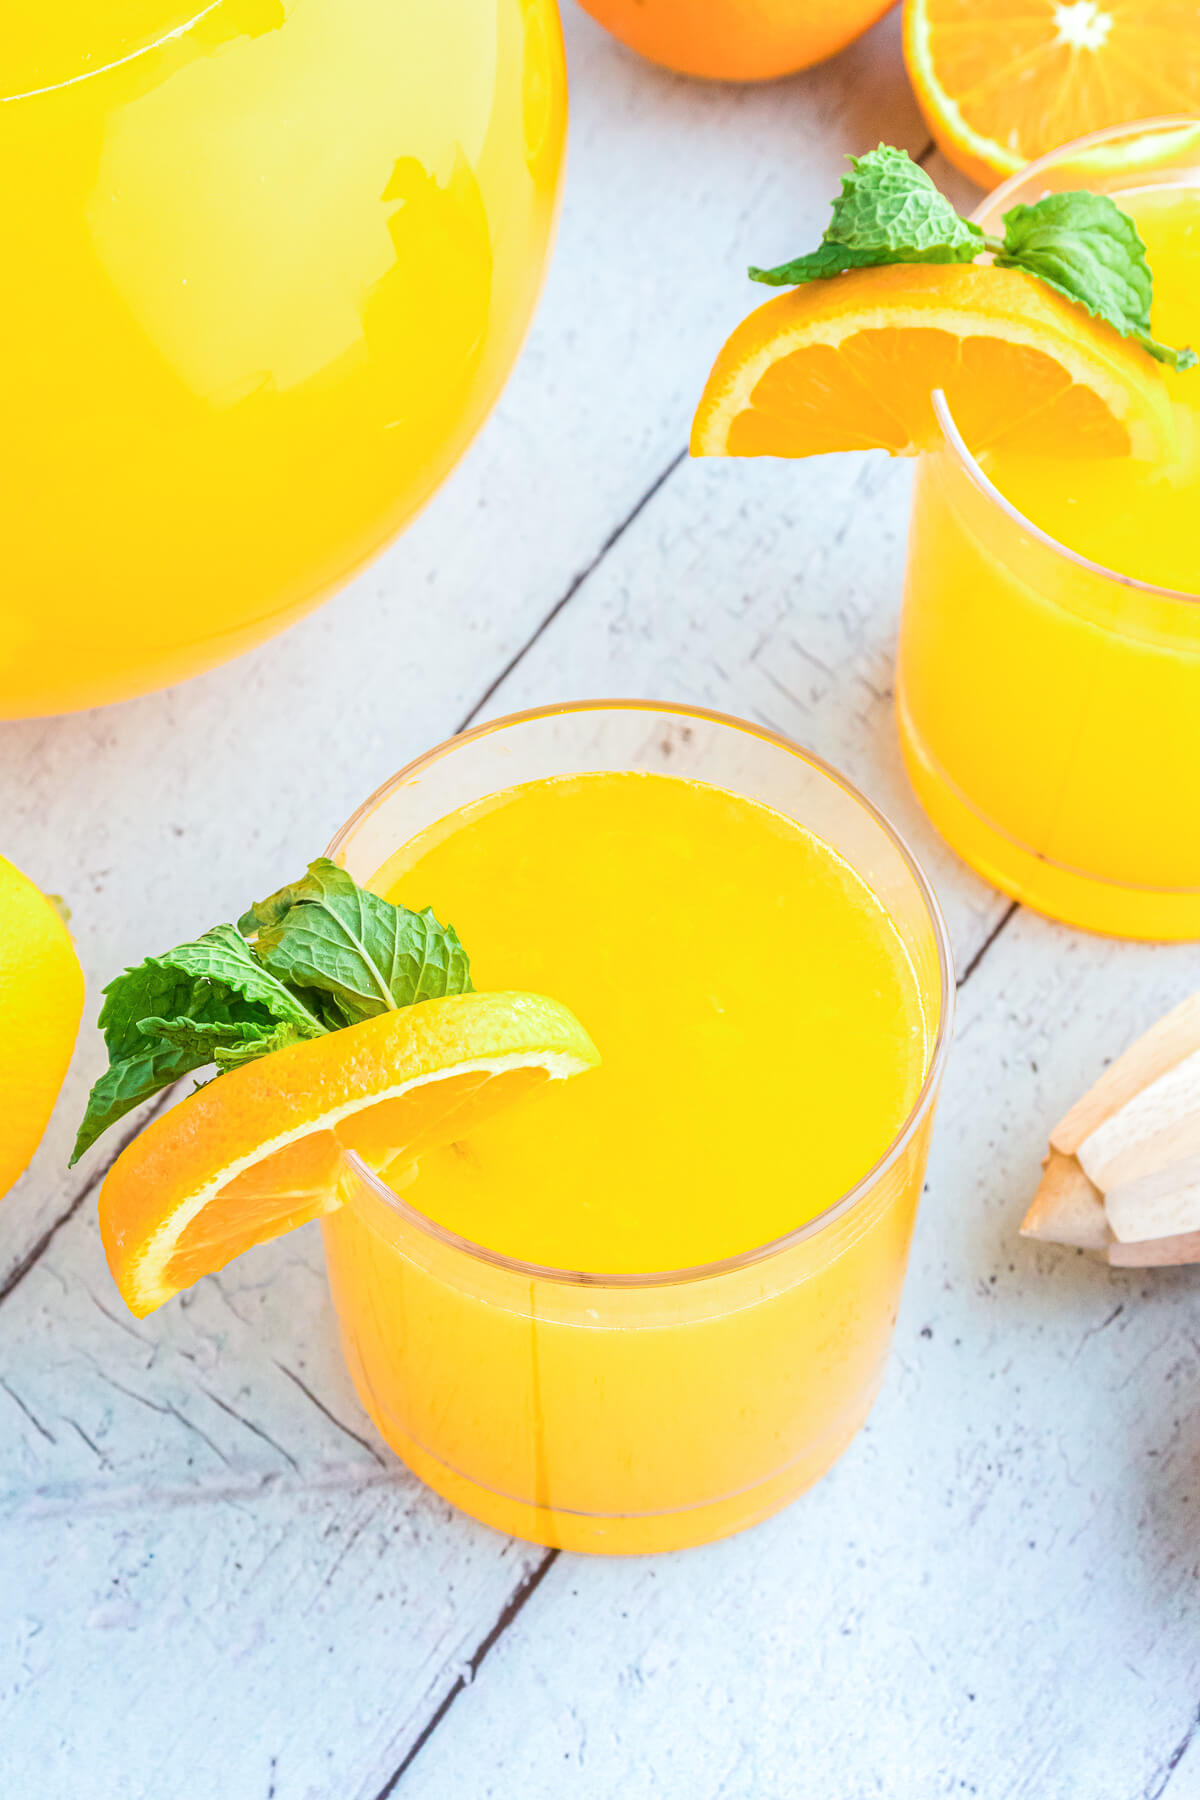 Two glasses of bright homemade orangeade garnished with orange wheels and green sprigs of fresh mint.